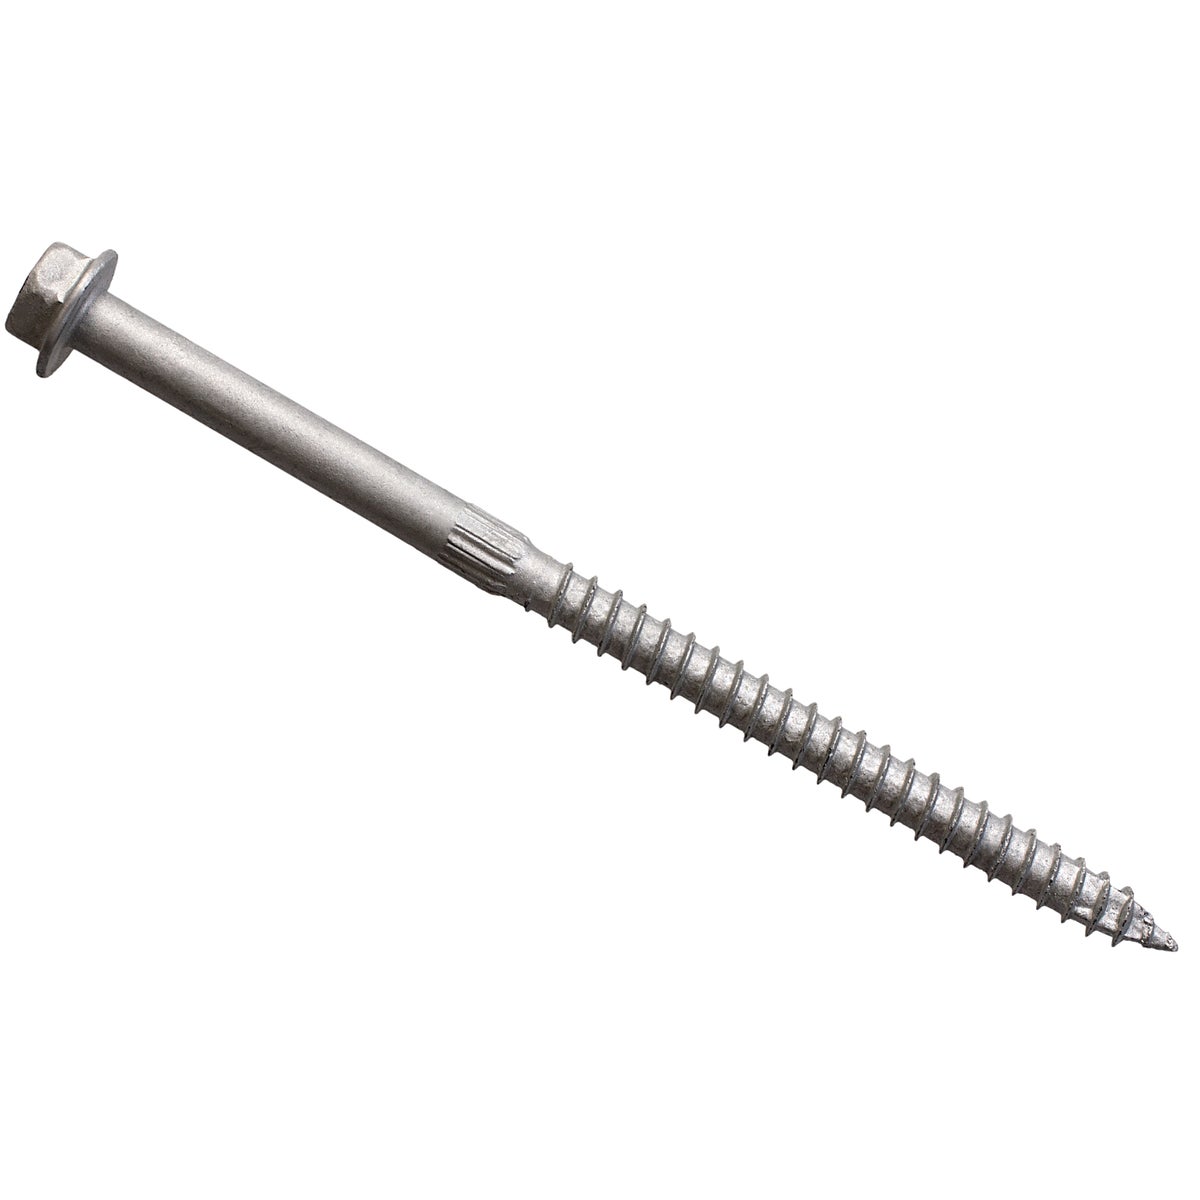 Item 200082, Simpson Strong Tie Strong Drive SDS Heavy -Duty Connector screw is ideal 